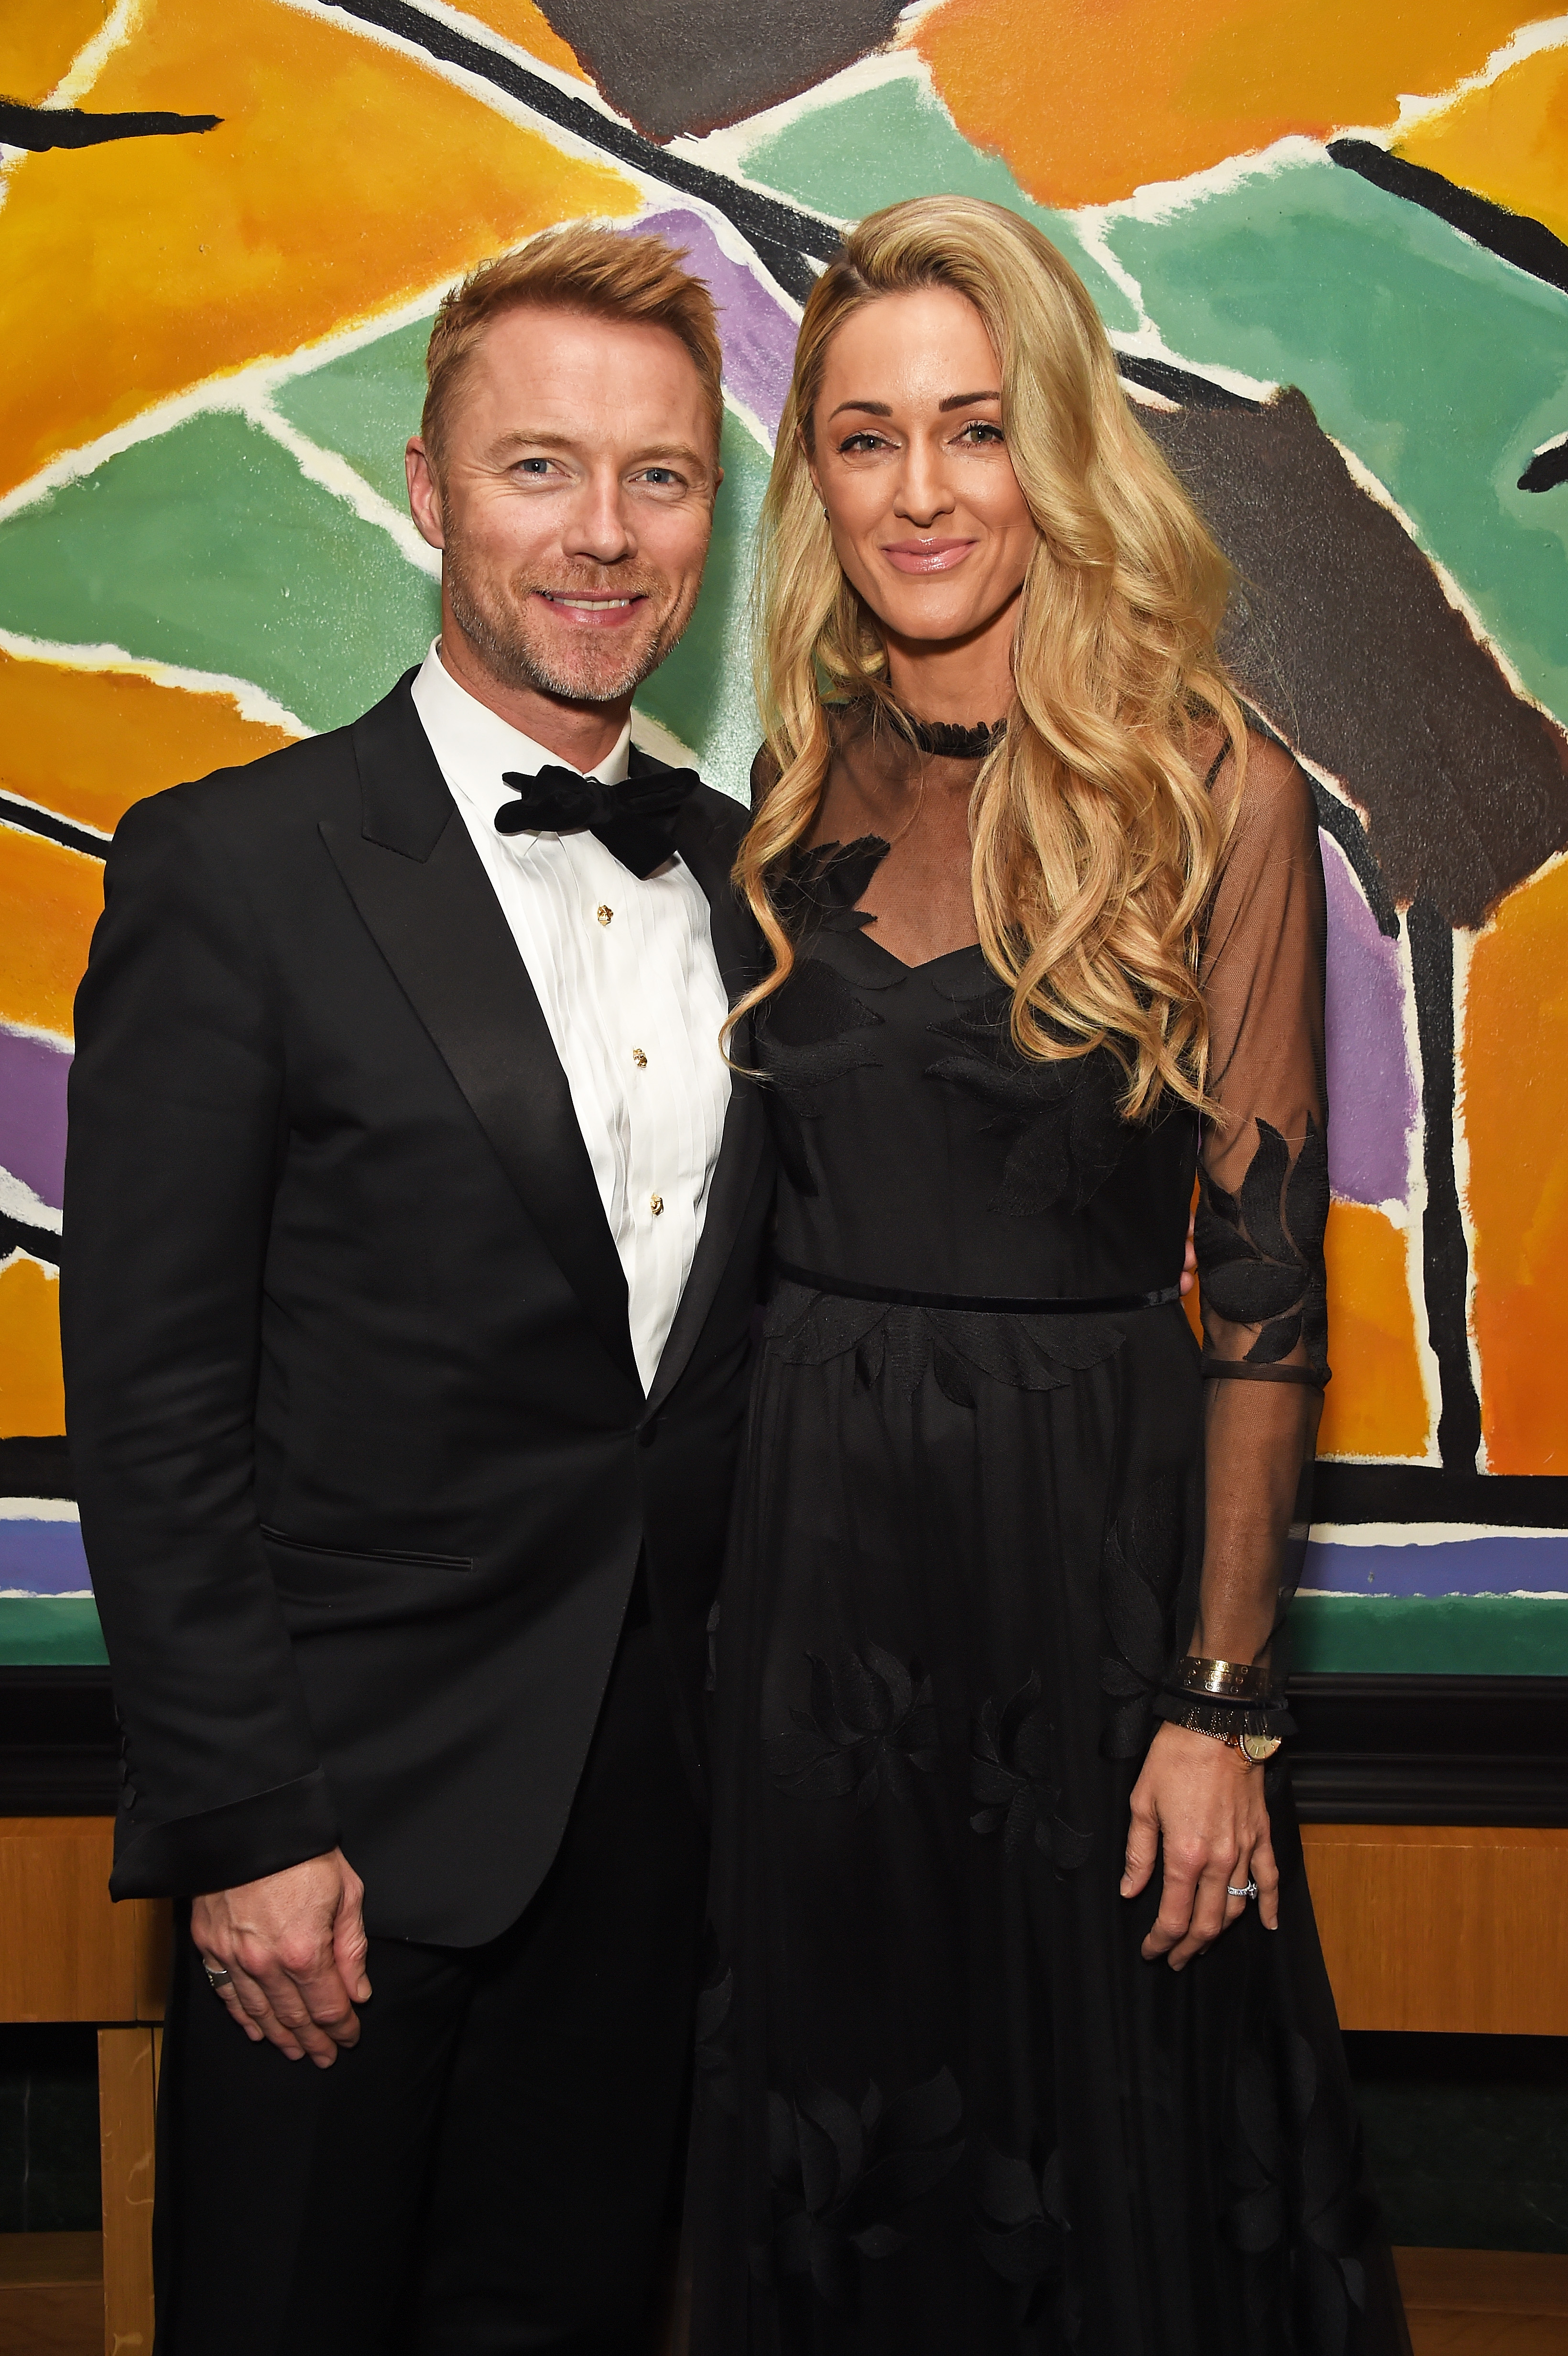 Ronan Keating and wife Storm attends the 9th Annual Global Gift Gala held at The Rosewood Hotel on November 2, 2018 in London, England.